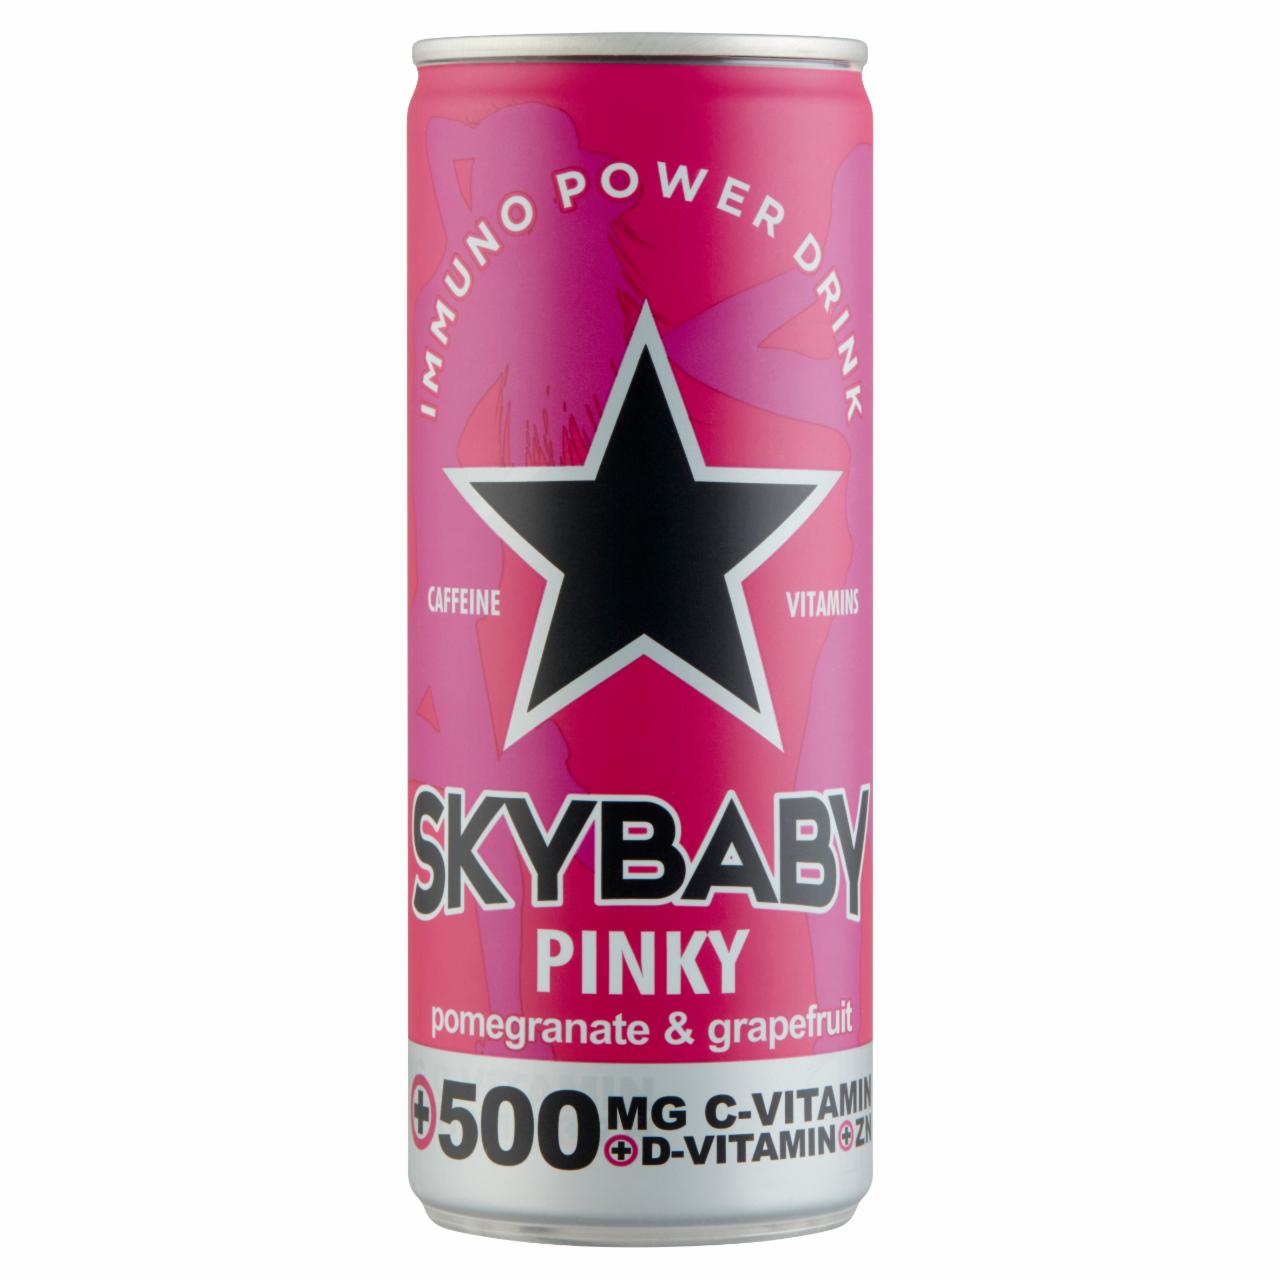 Photo - Skybaby Power Drink Pinky Carbonated Grapefruit and Pomegranate Flavored Non-Alcoholic Drink 0,25 l